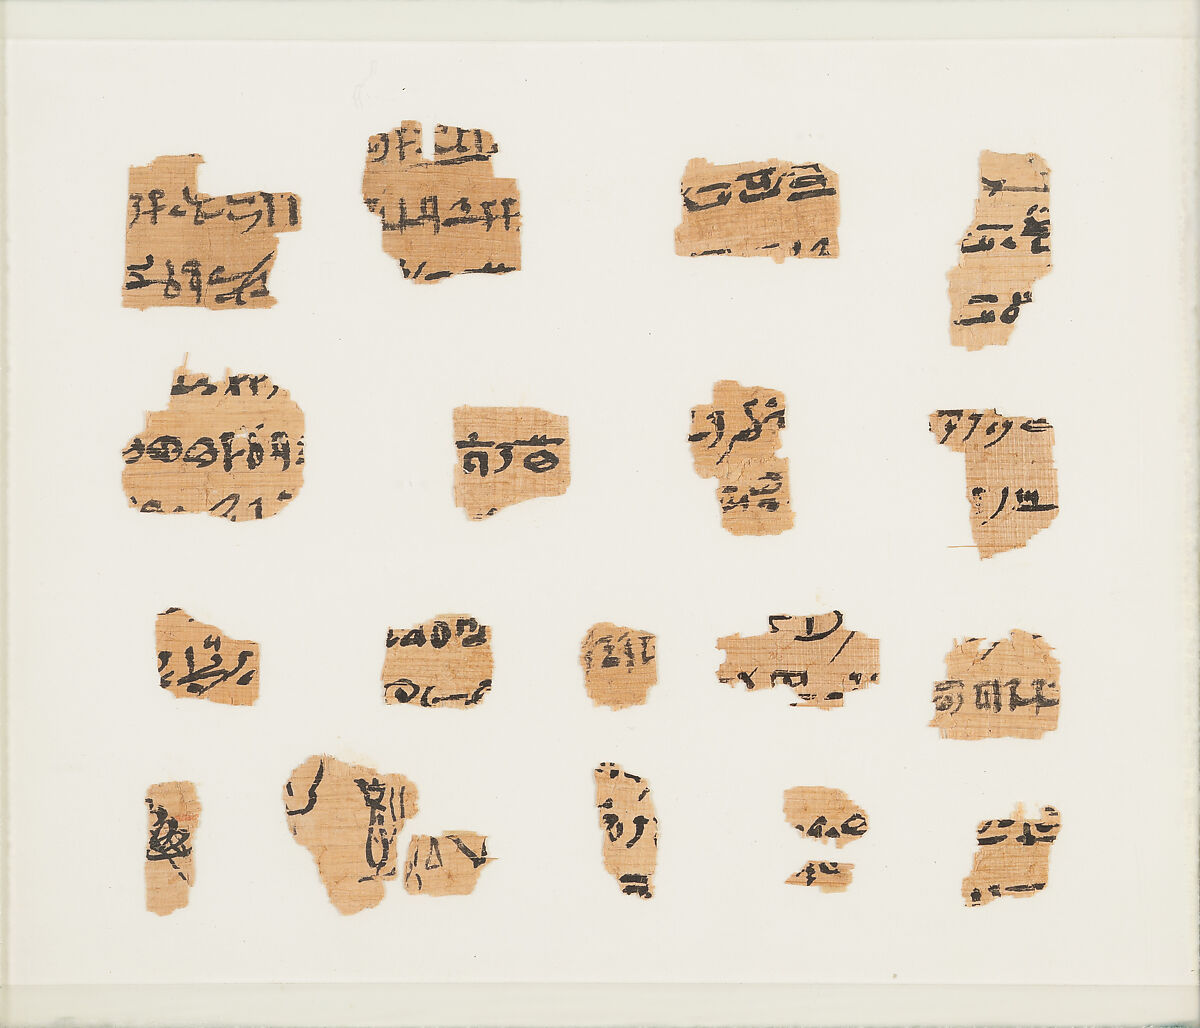 Papyrus fragments, Book of the Dead, Papyrus, ink 